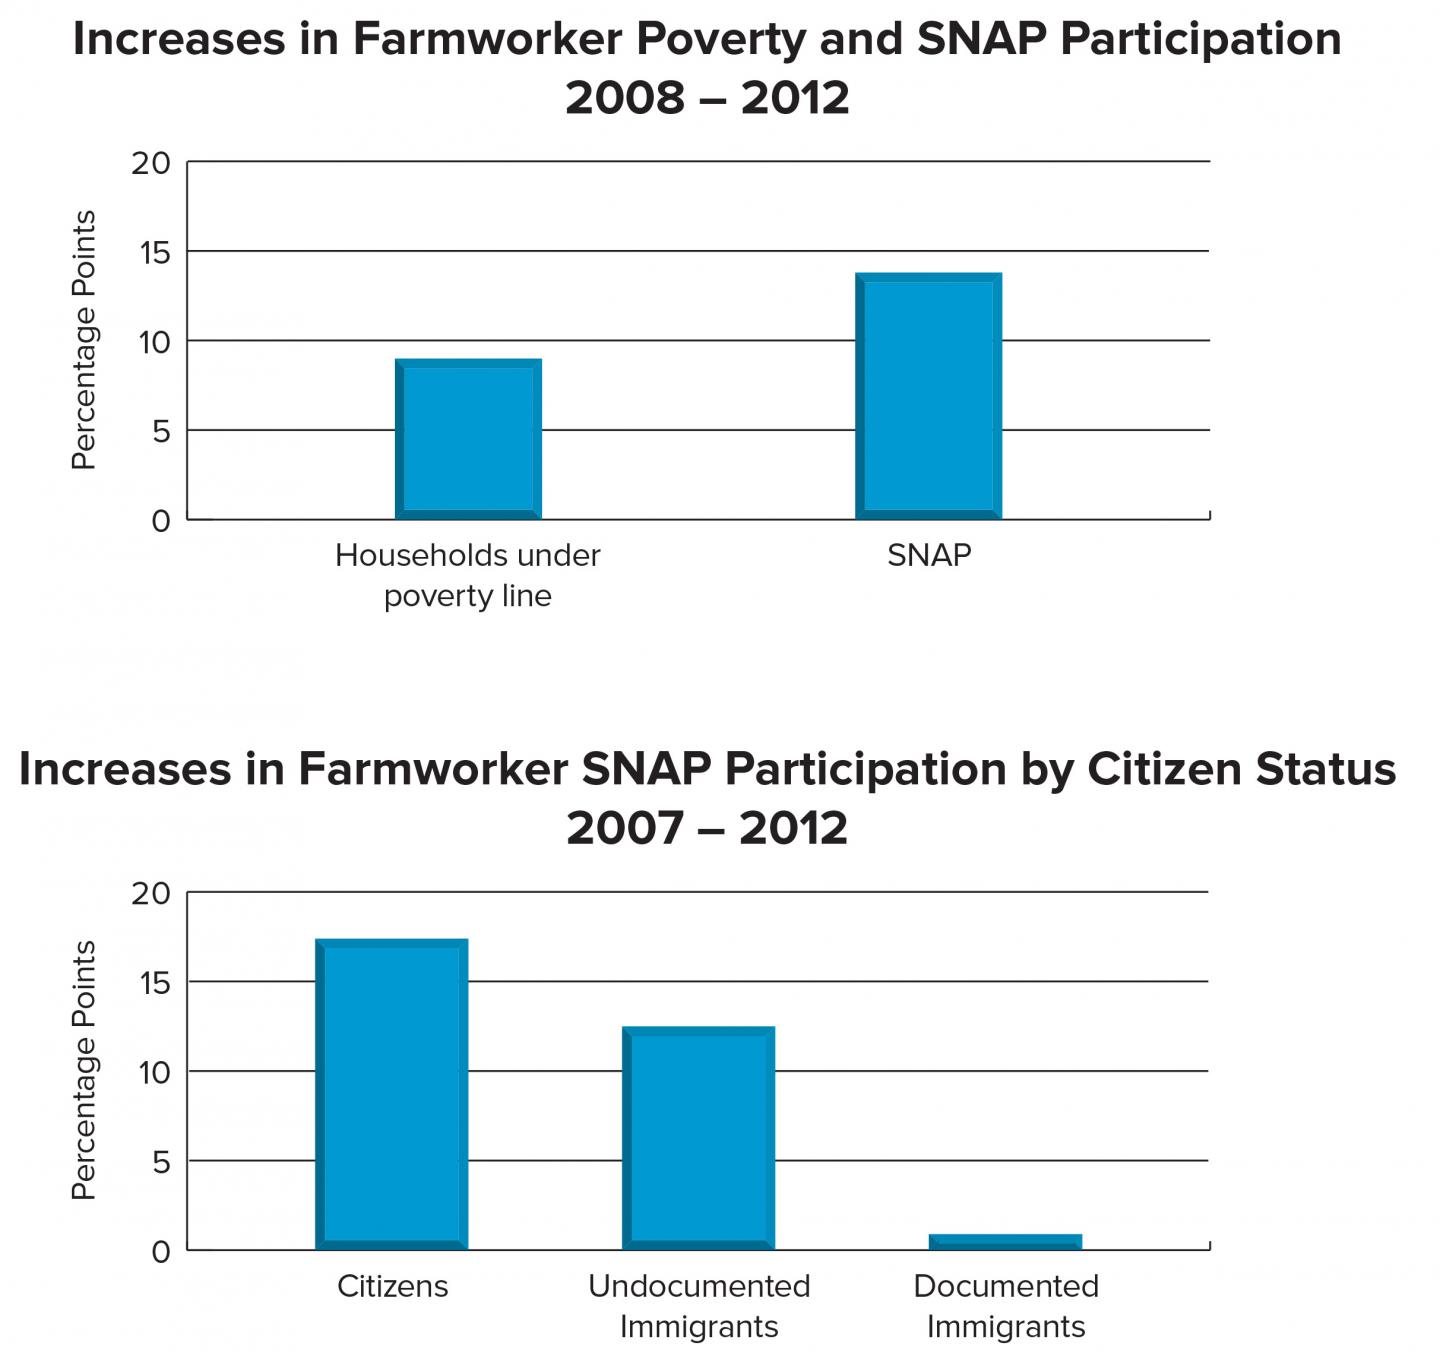 Increases in SNAP Participation Among Farmworkers